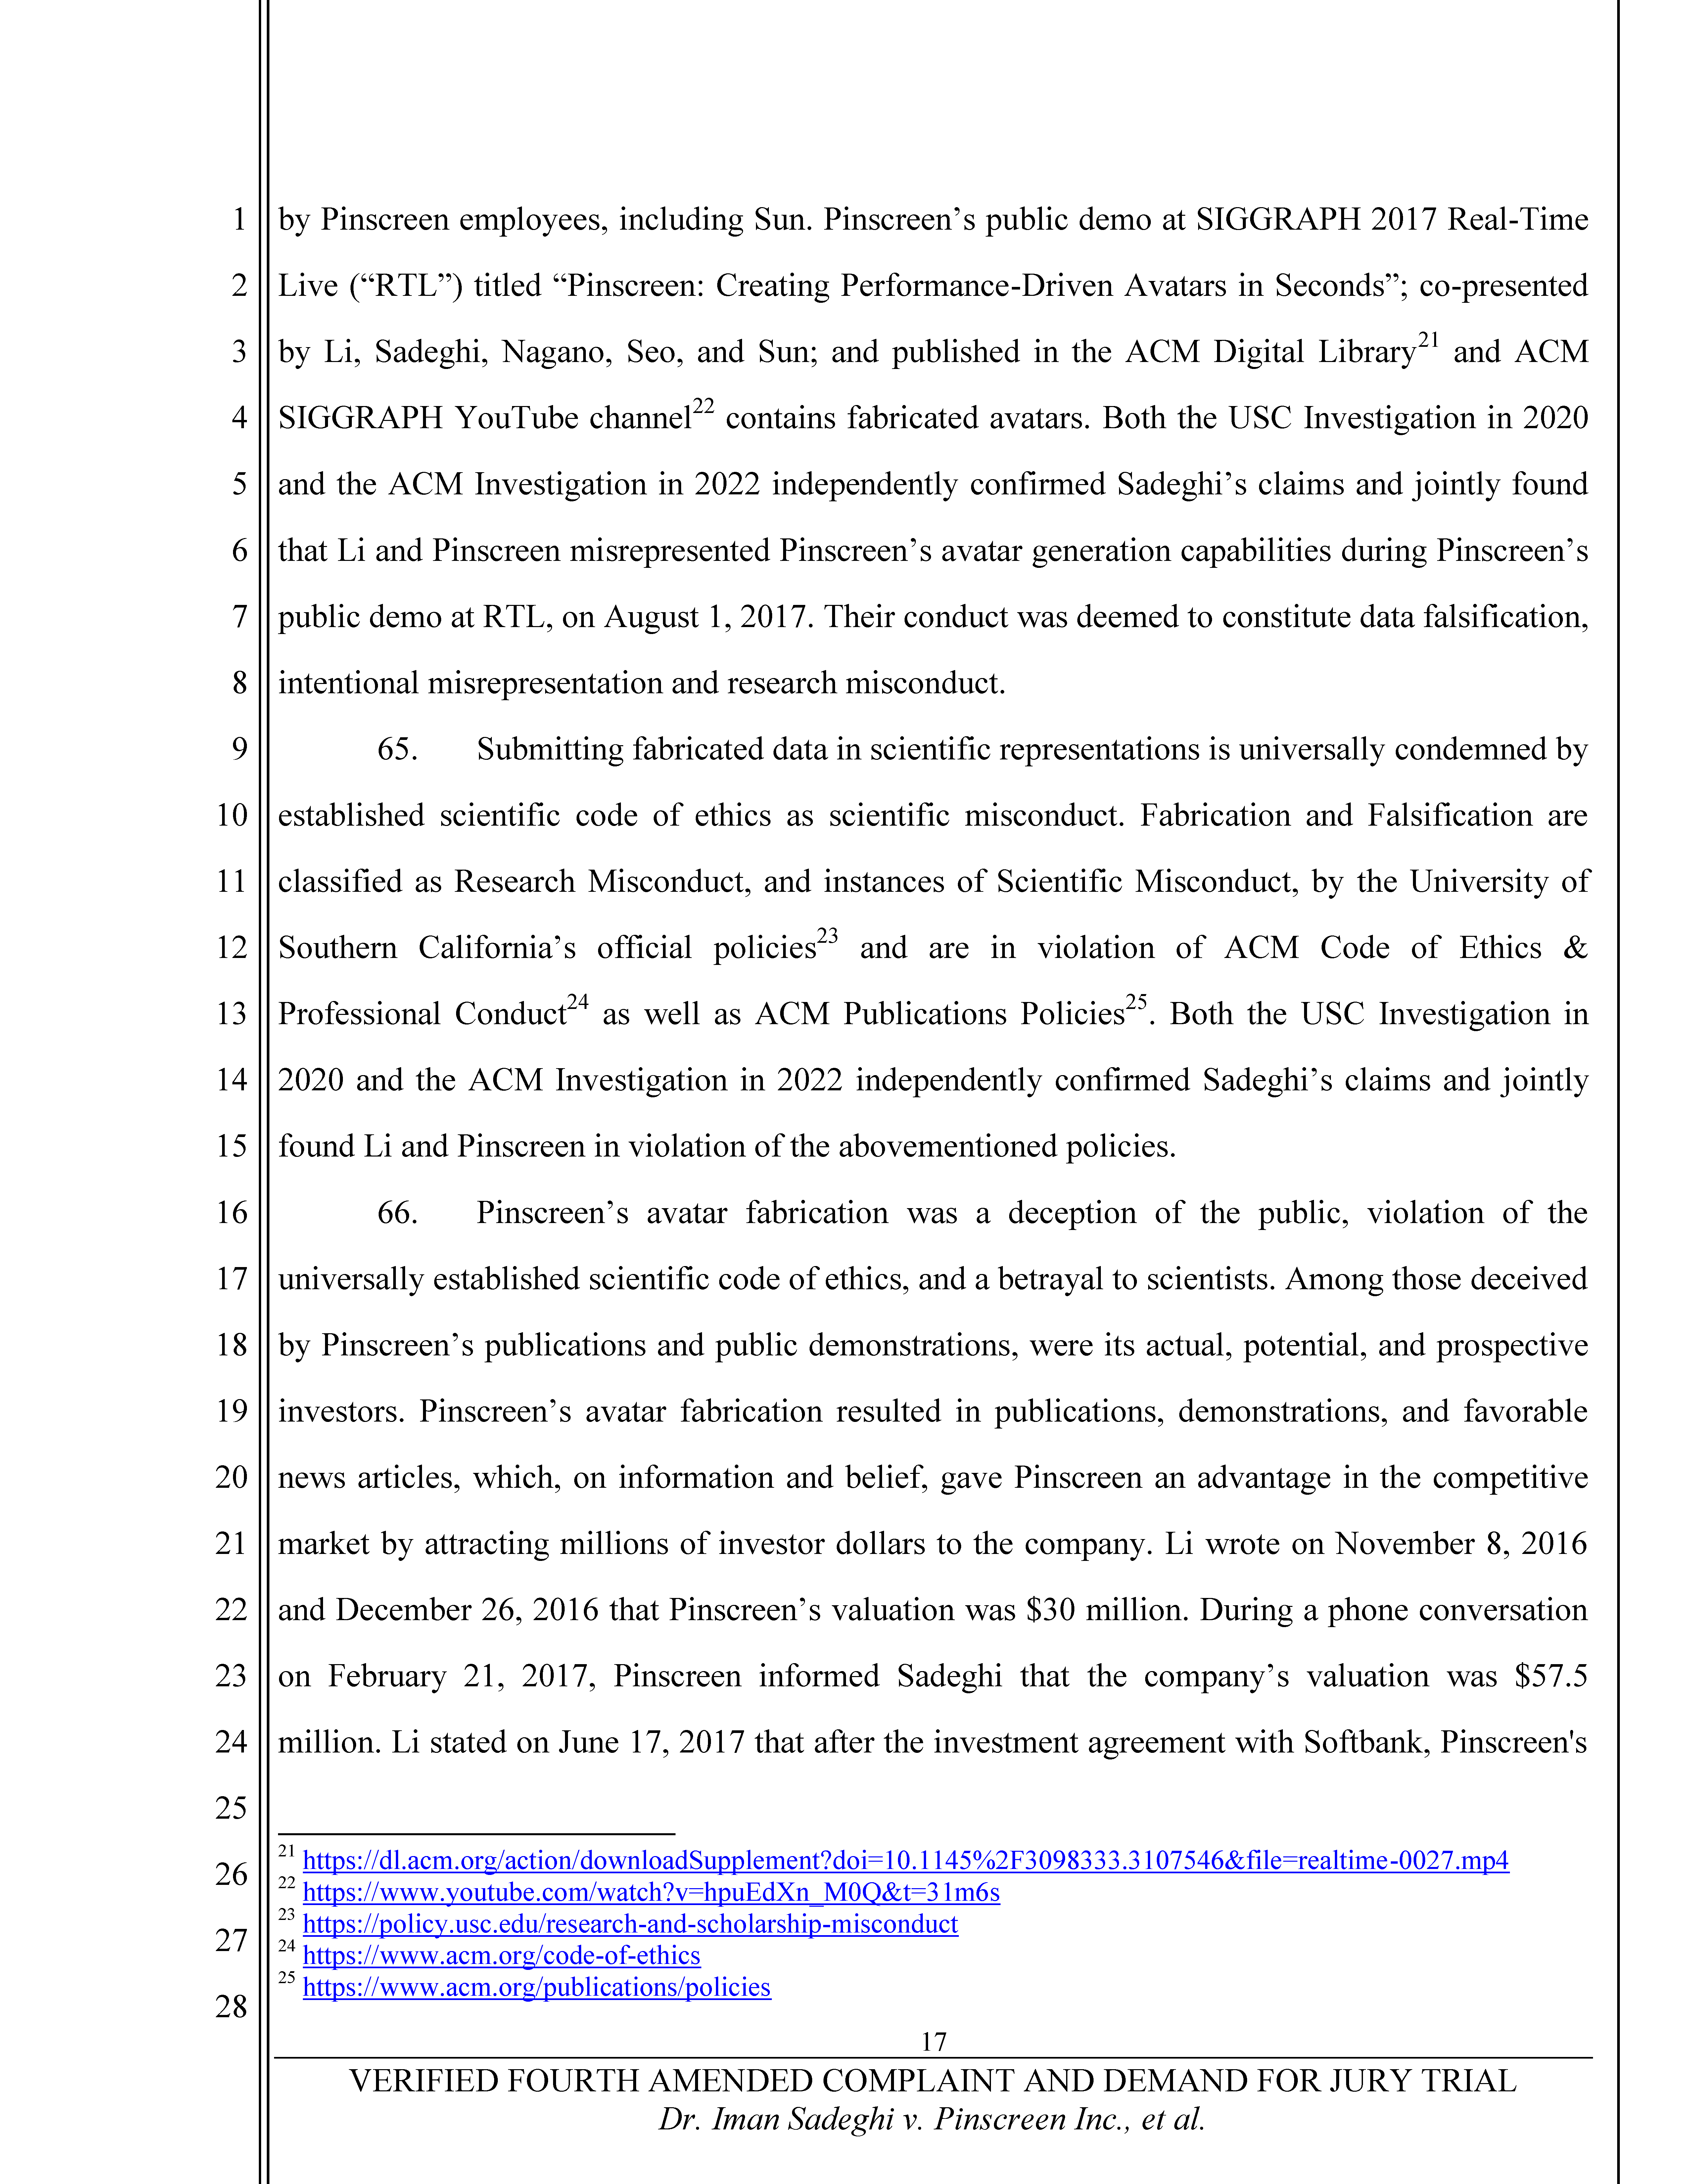 Fourth Amended Complaint (4AC) Page 18